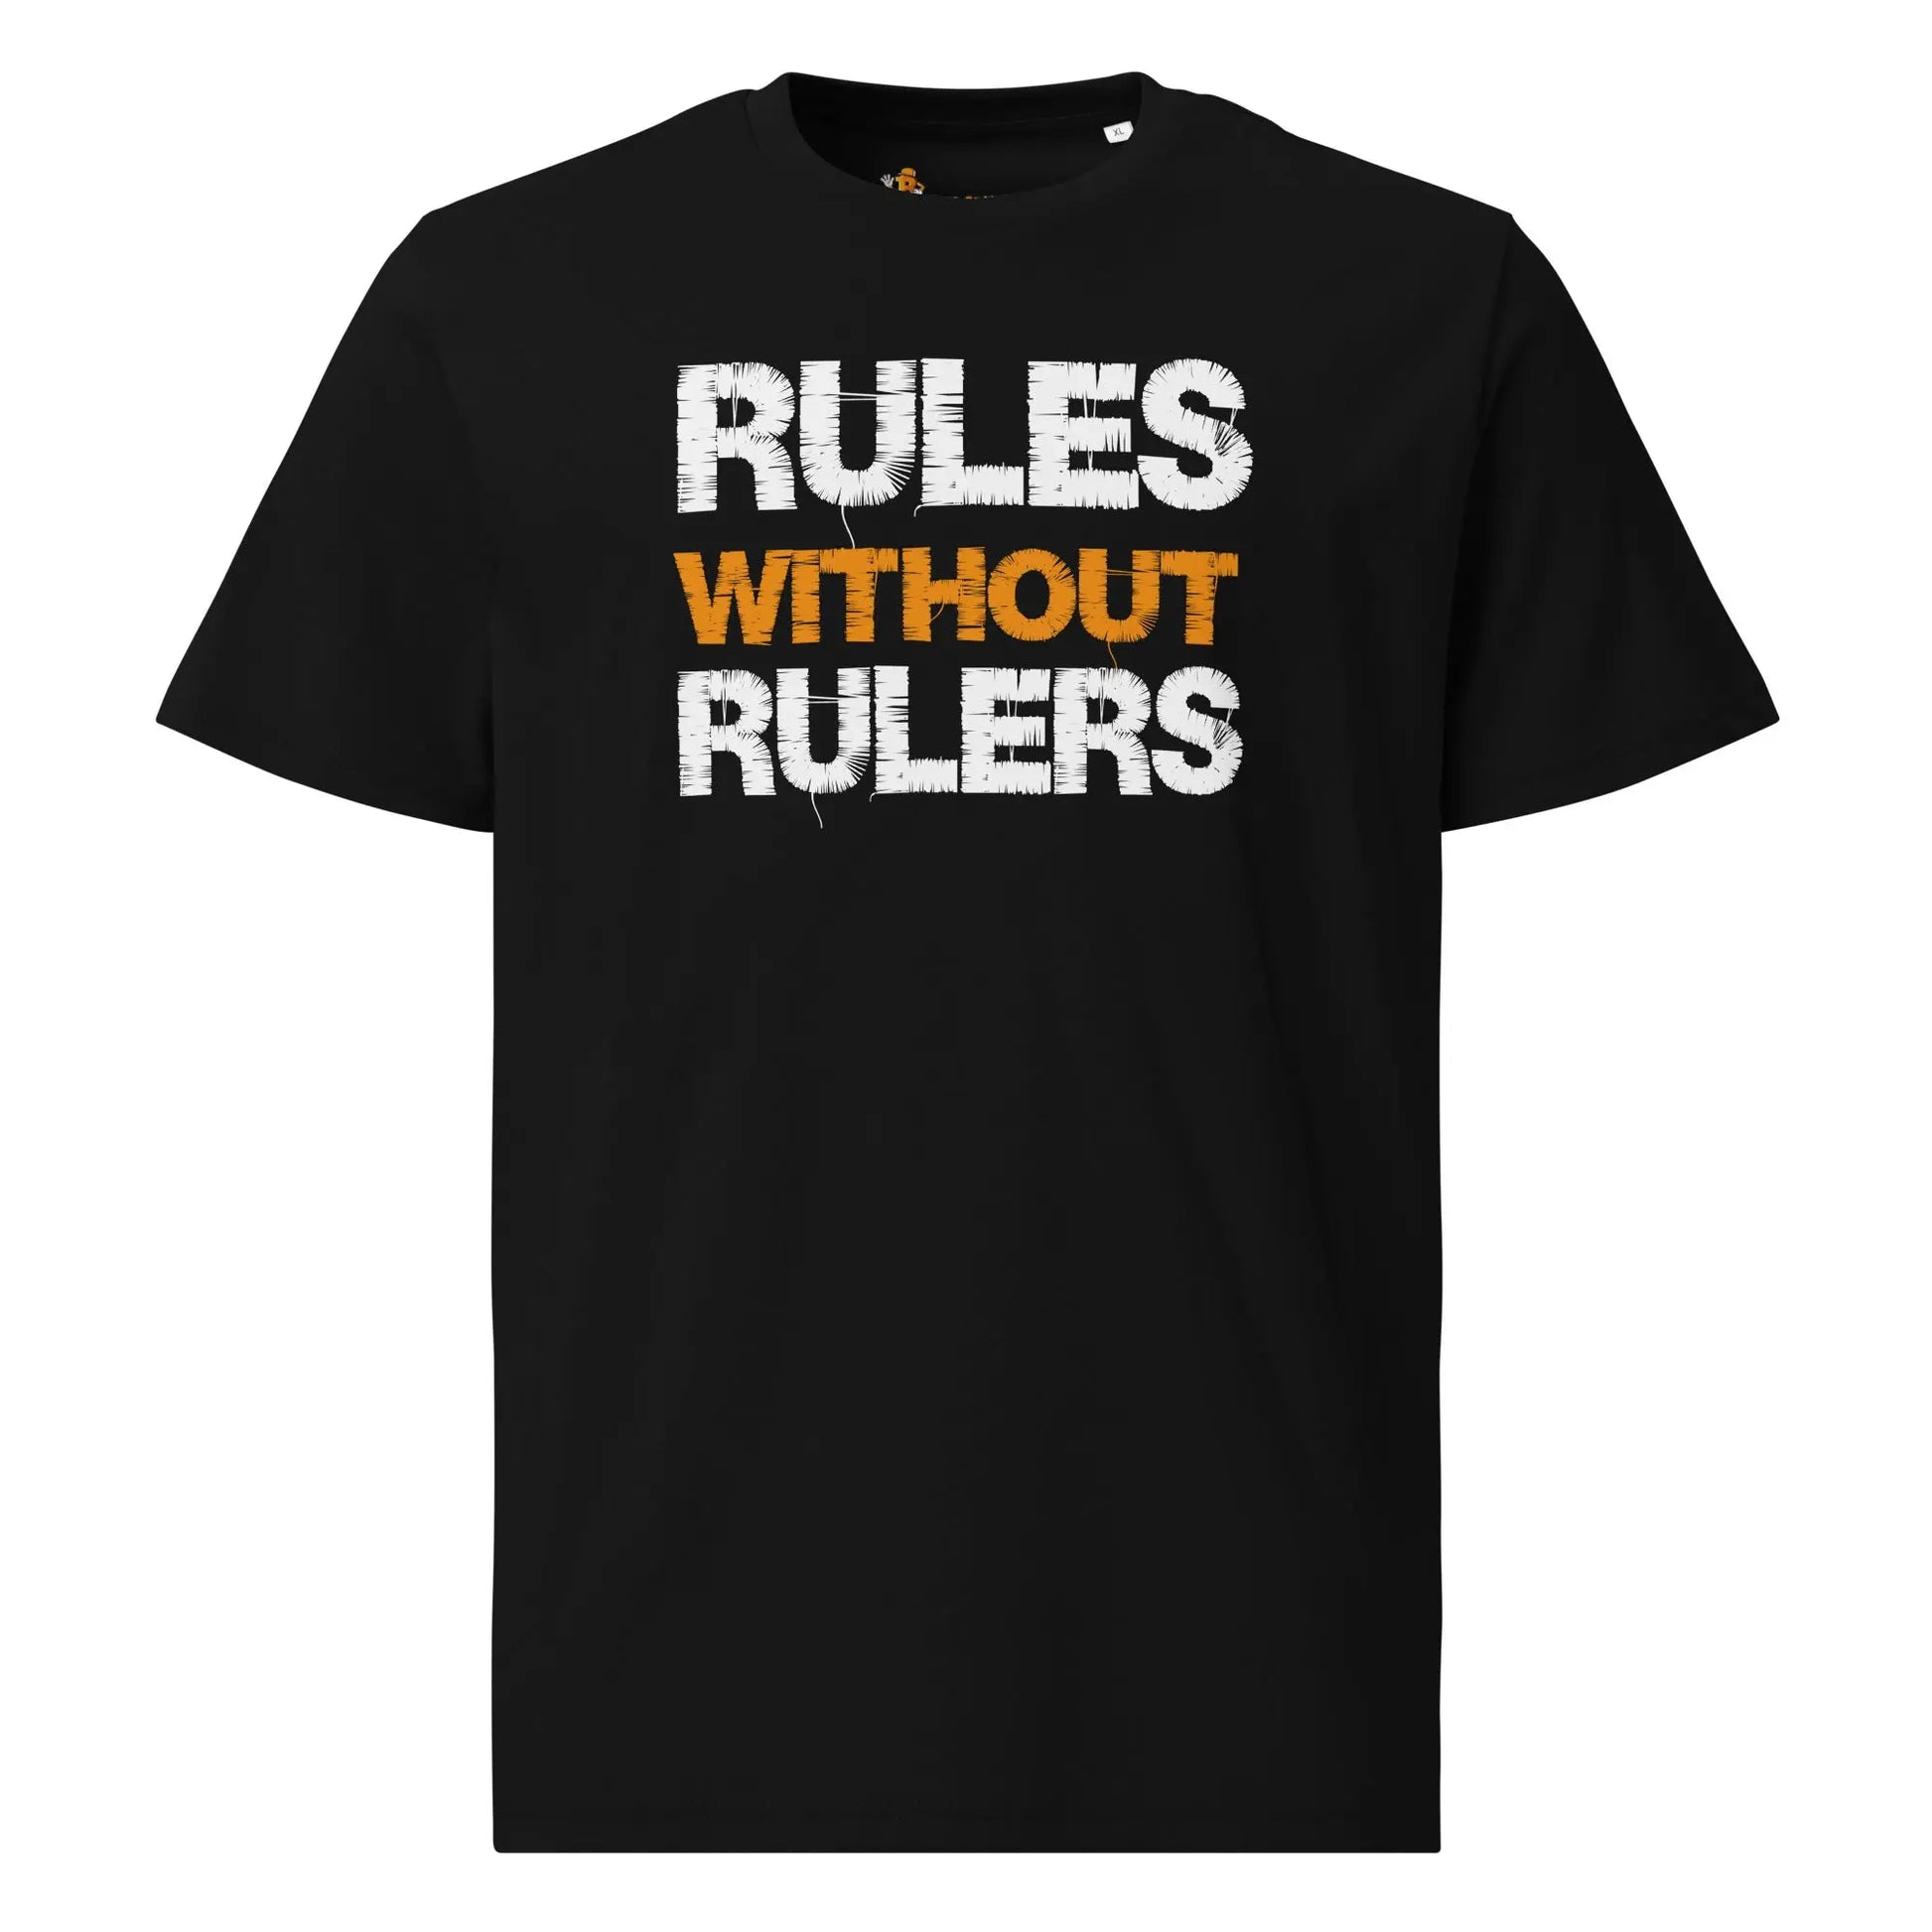 Rules Without Rulers - Premium Unisex Organic Cotton Bitcoin T-shirt Black Color